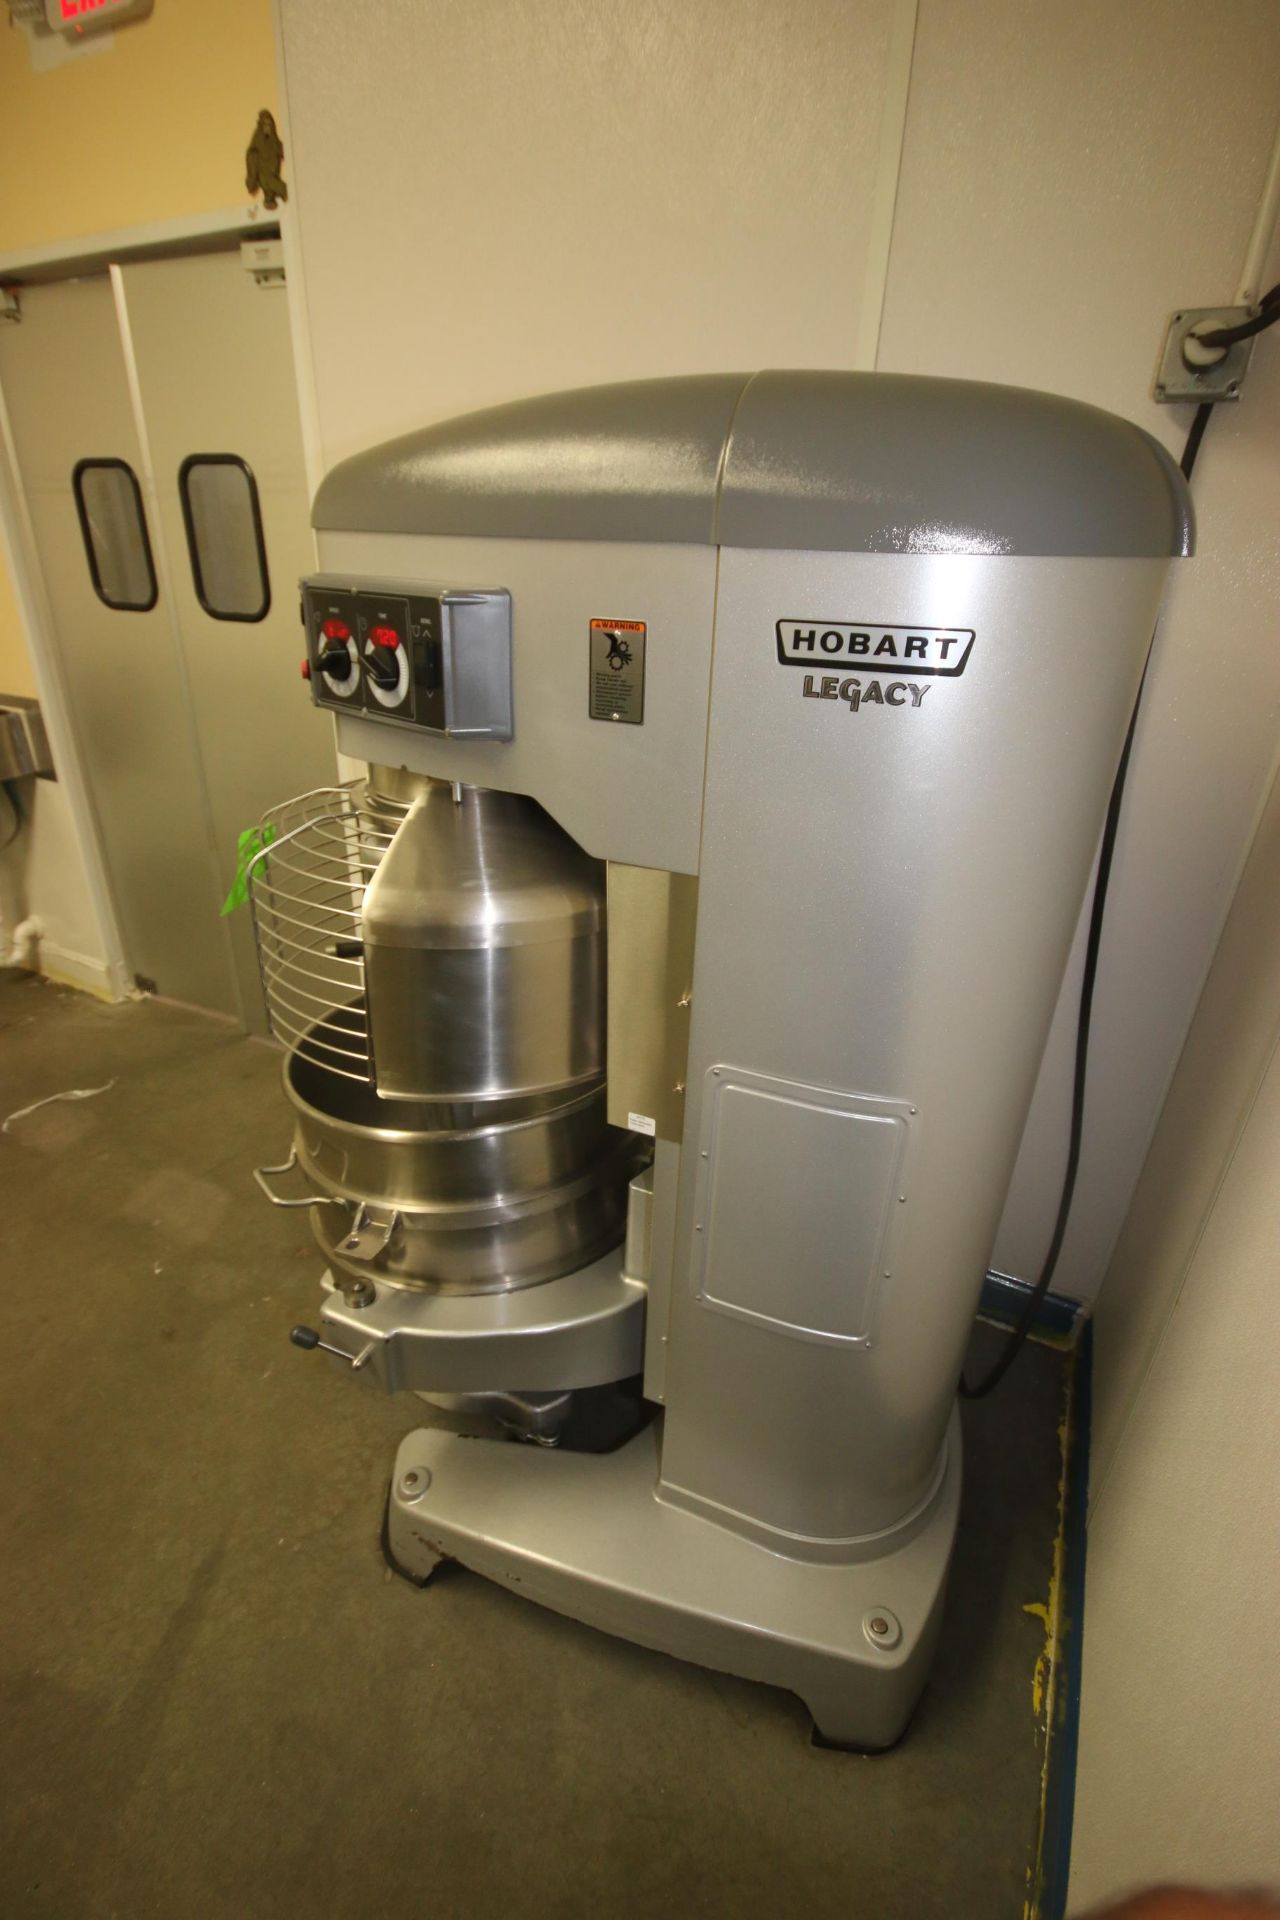 Hobart Legacy Mixer, M/N HL1400, S/N 31-1499-829, with 5 hp Motor, 1200 RPM, 200-240 Volts, 3 Phase, - Image 4 of 10